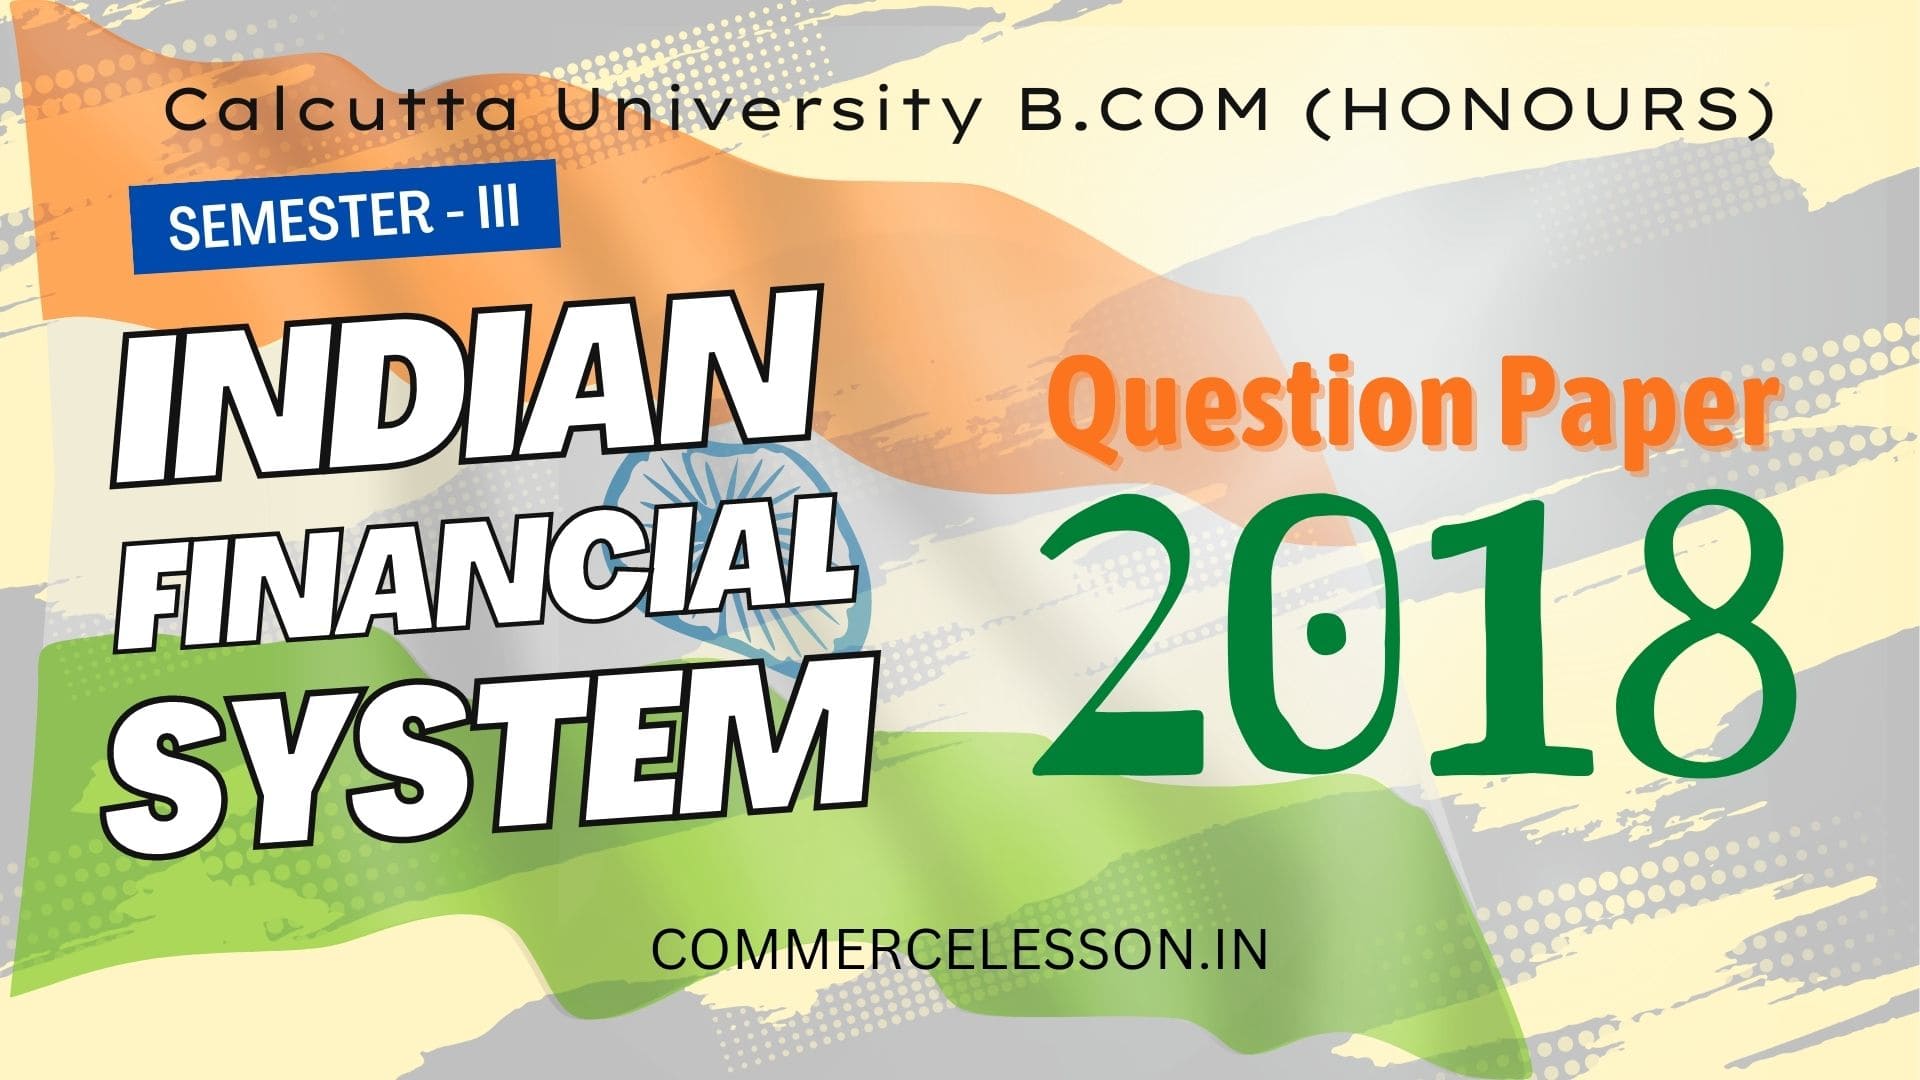 Indian Financial System Honours Question Paper 2018